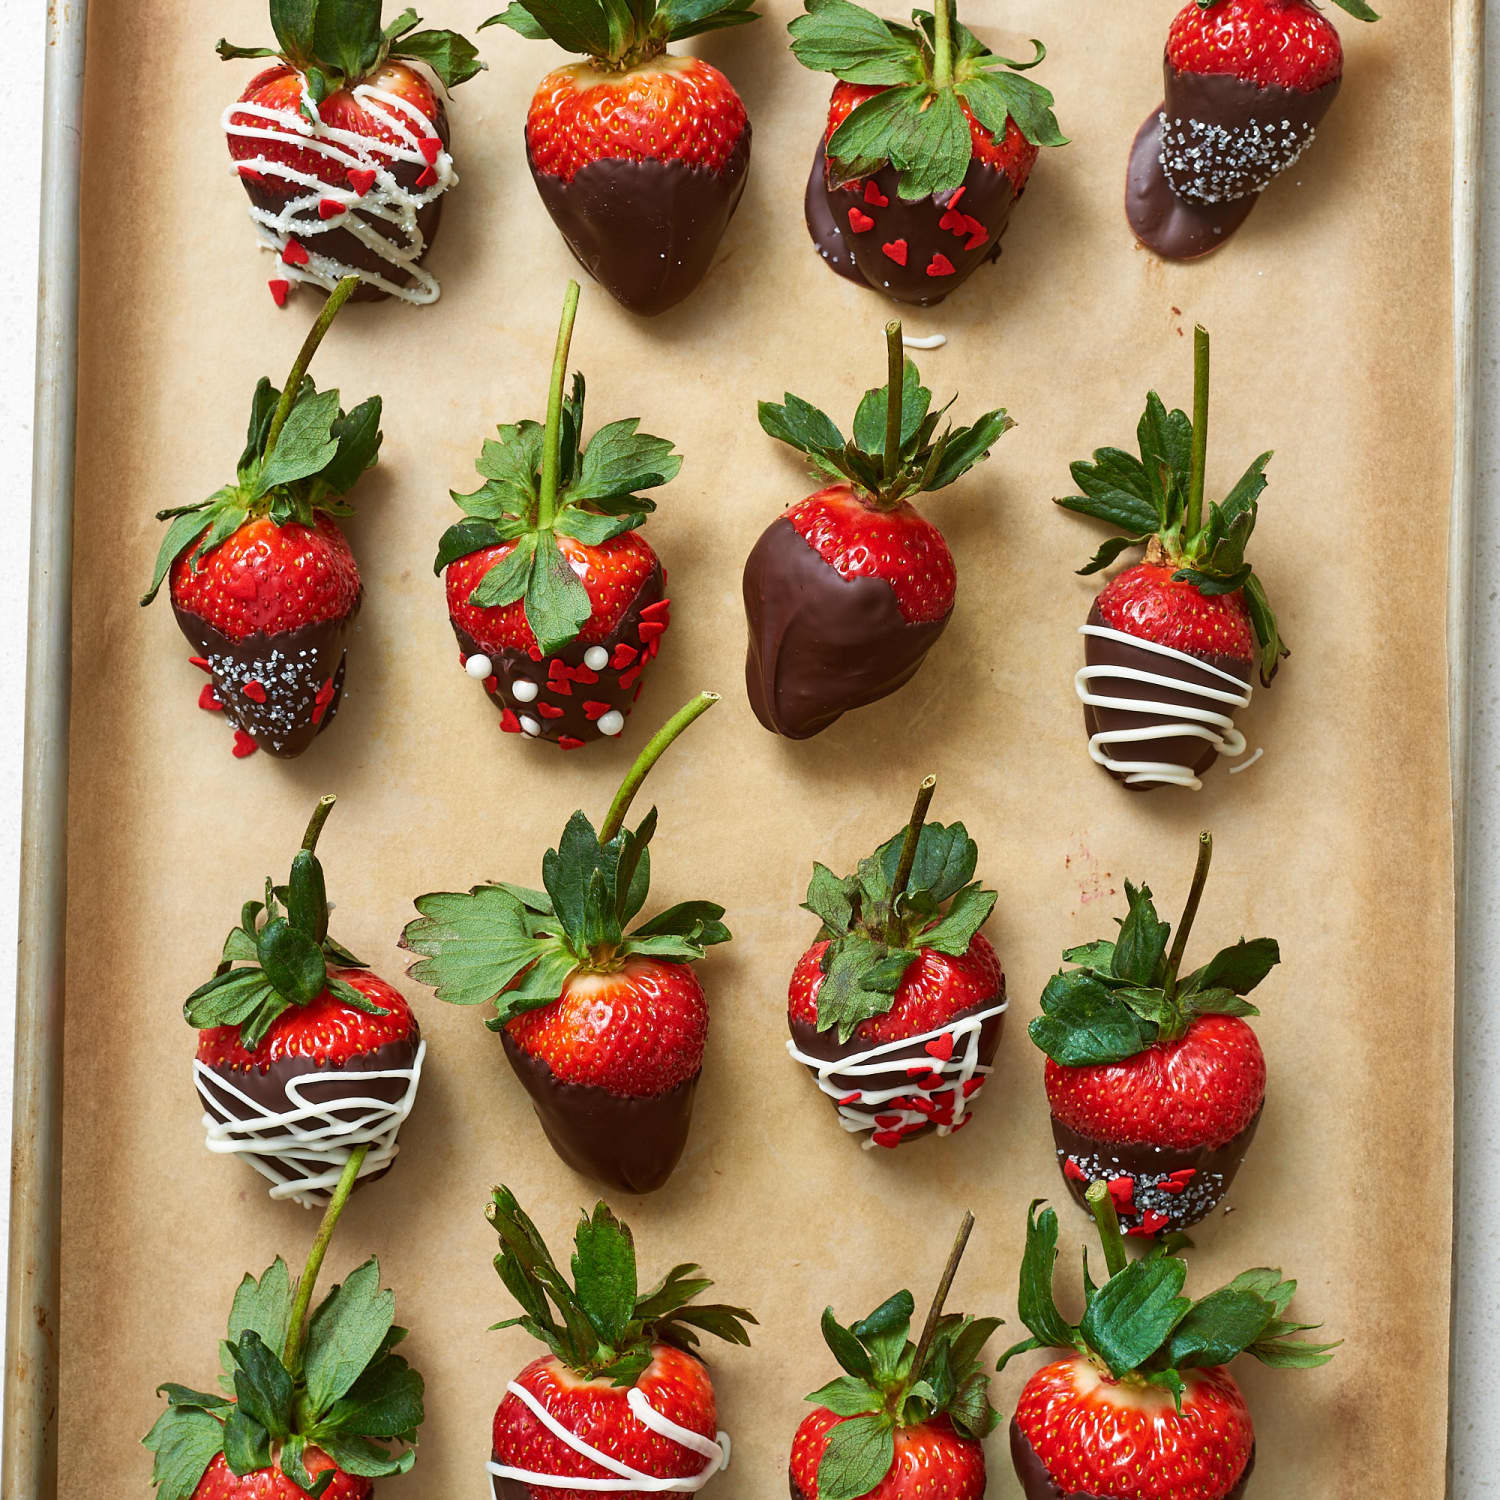 How to Make Chocolate Covered Strawberries Perfectly